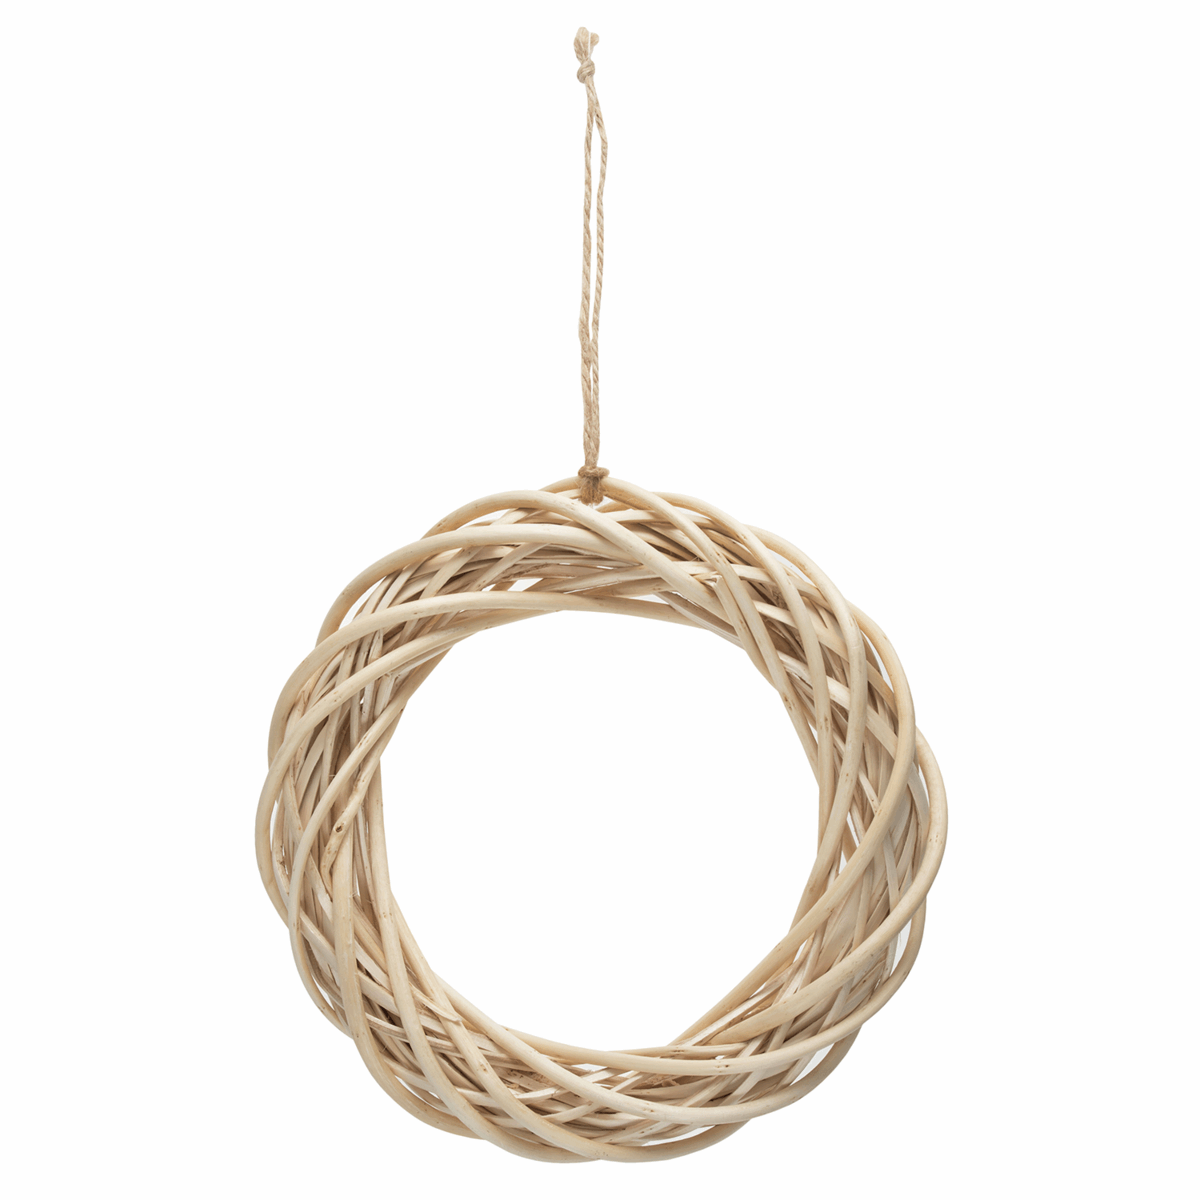 Wreath Base Willow